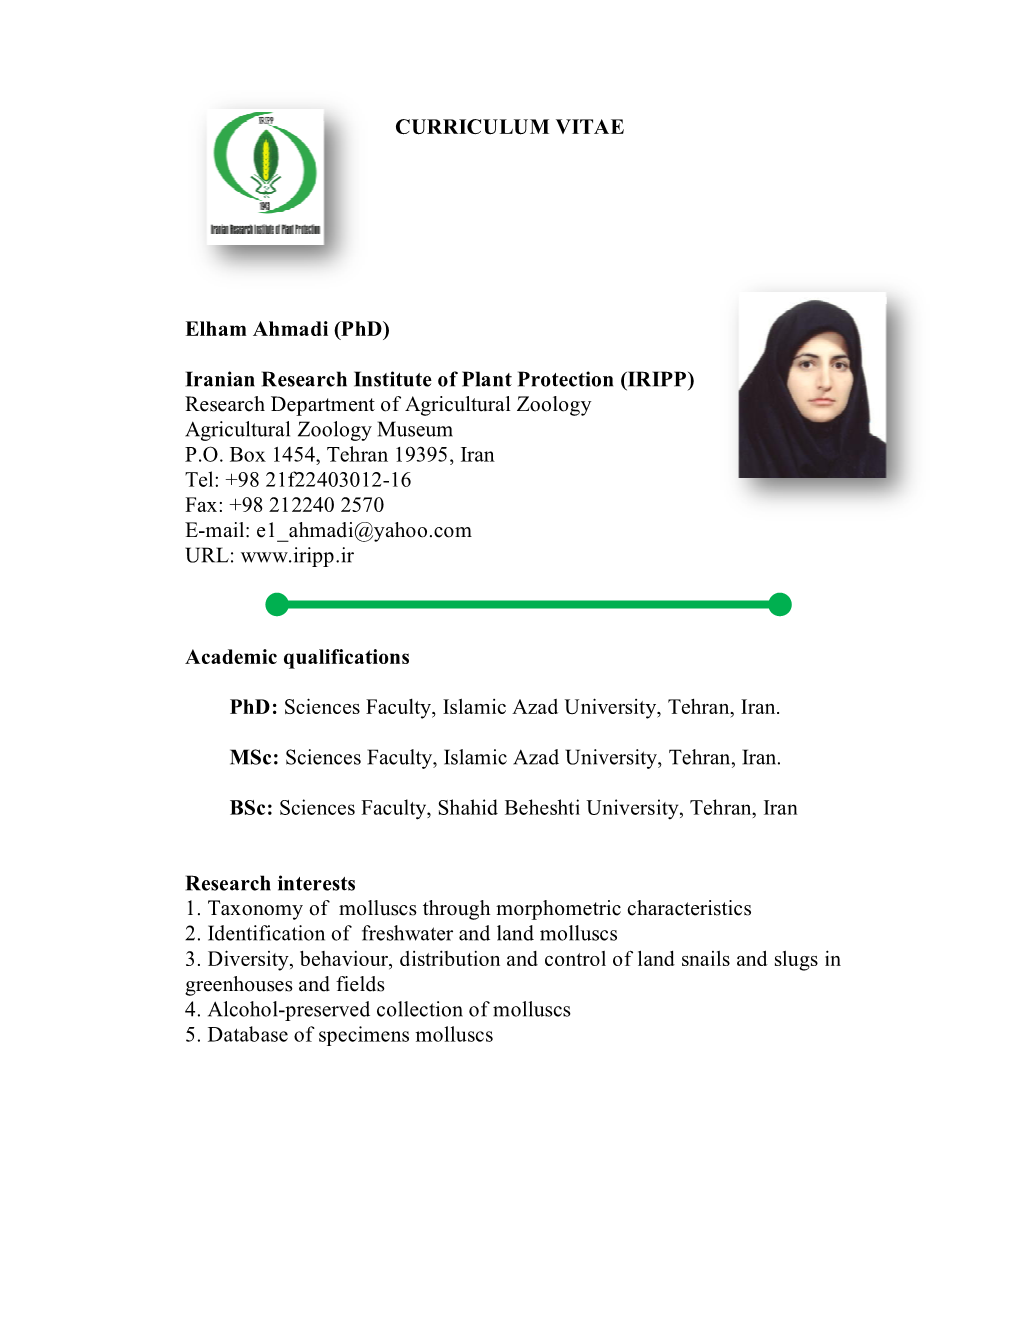 Phd) Iranian Research Institute of Plant Protection (IRIPP